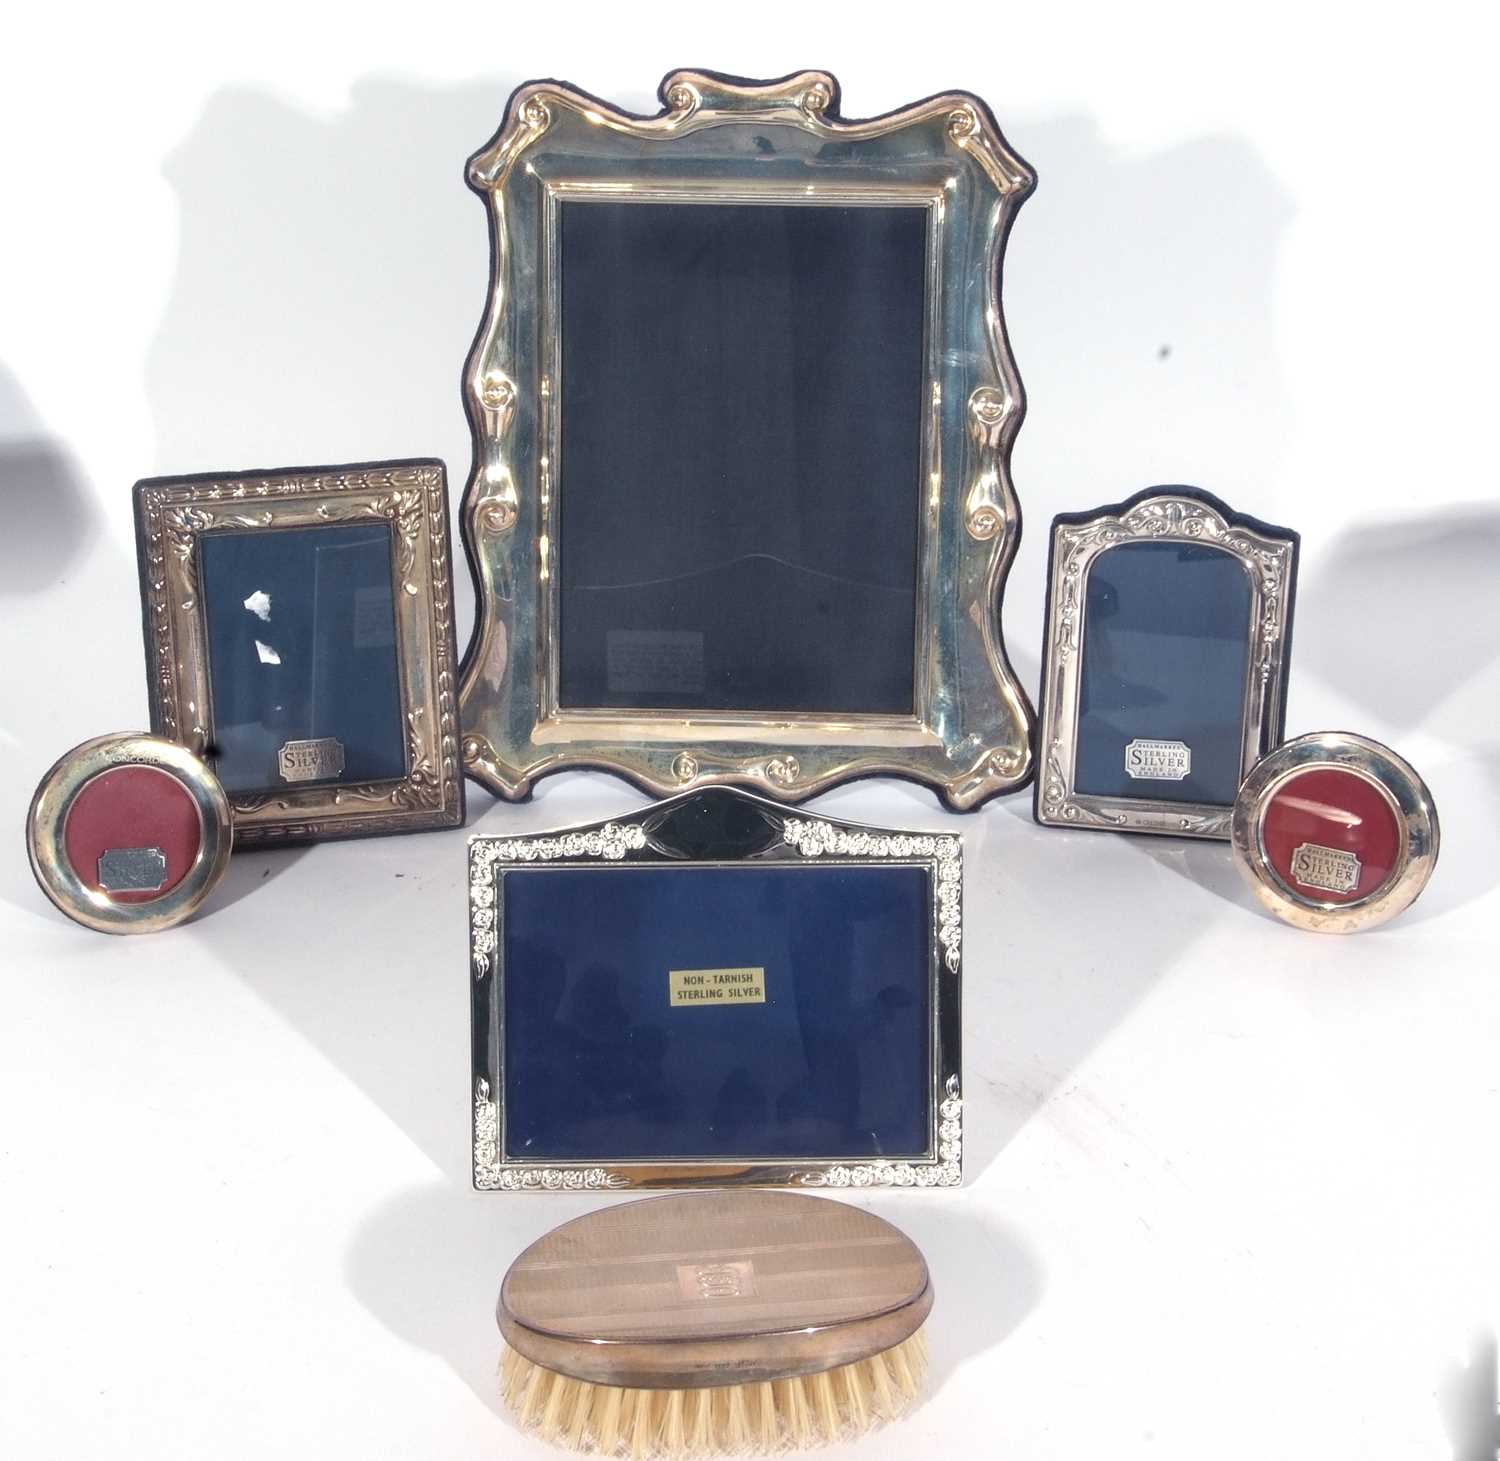 Mixed Lot: boxed silver photograph frame, London 1991, easel backed, 24 x 19cm; a boxed silver